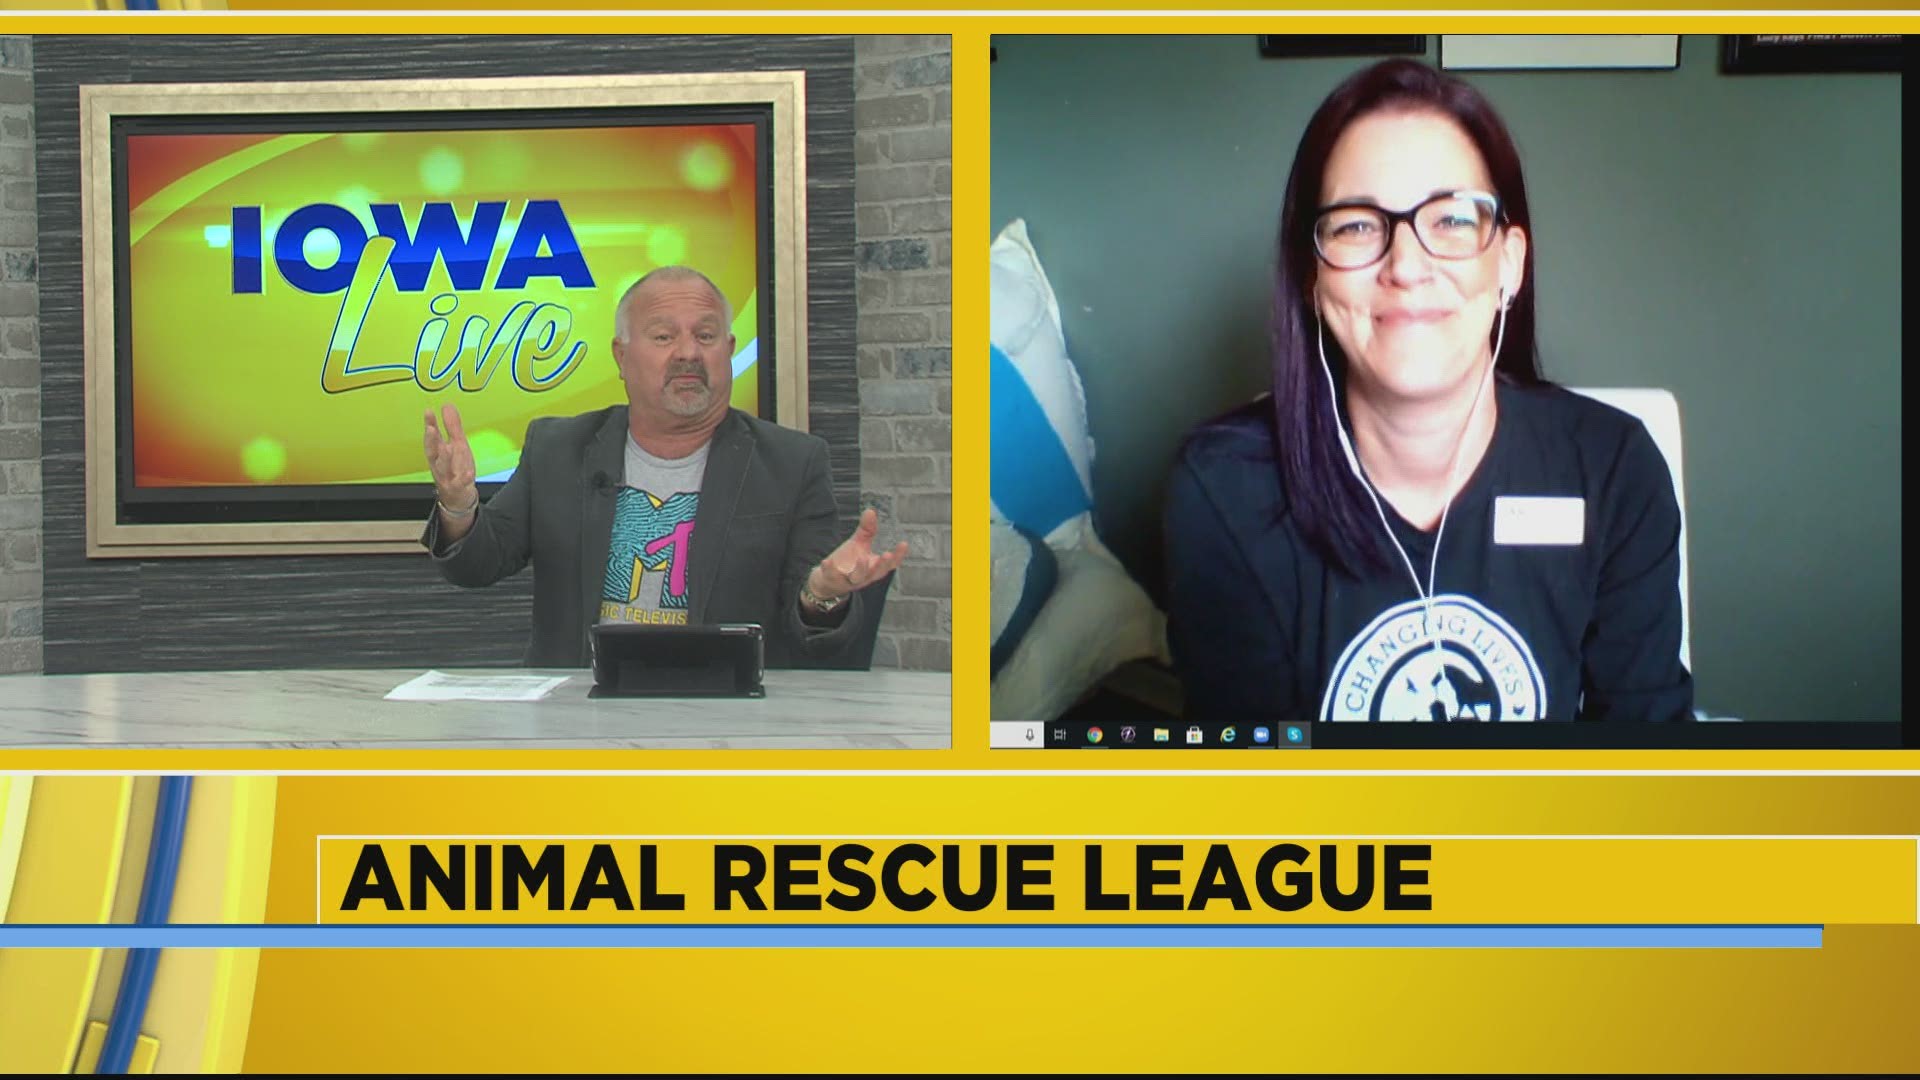 Lou chats with Cat with the Animal Rescue League